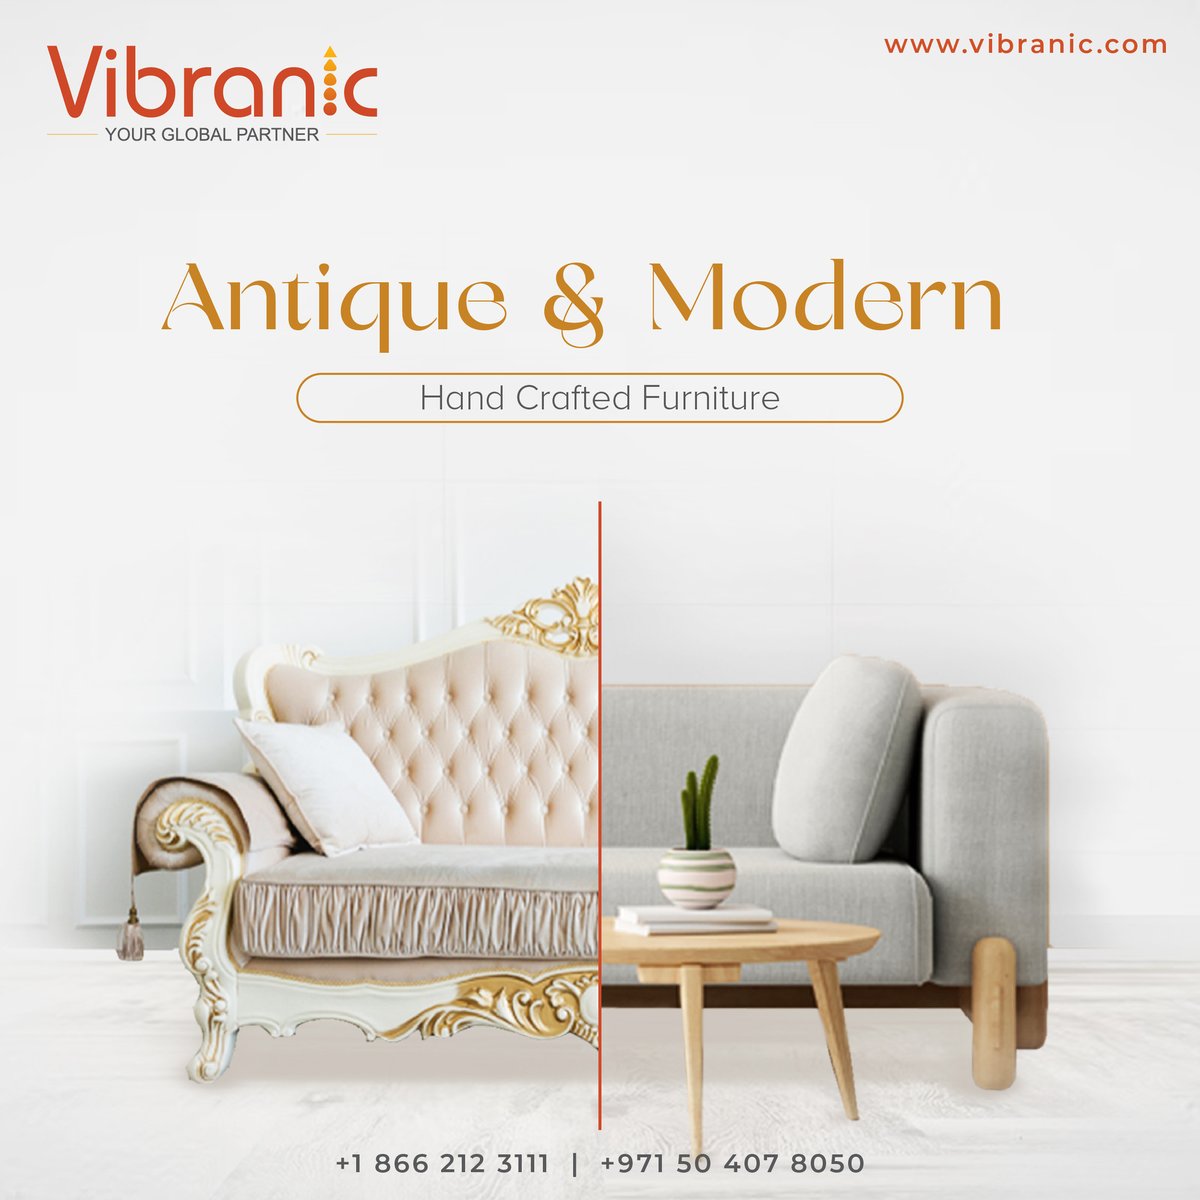 Vibranic's unique fusion of antique and modern handcrafted furniture epitomizes timeless sophistication. Discover a collection where heritage meets contemporary design, bringing elegance and Style to your space.

mail@vibranic.com or call us at +1 866 212 3111, +971 504078050